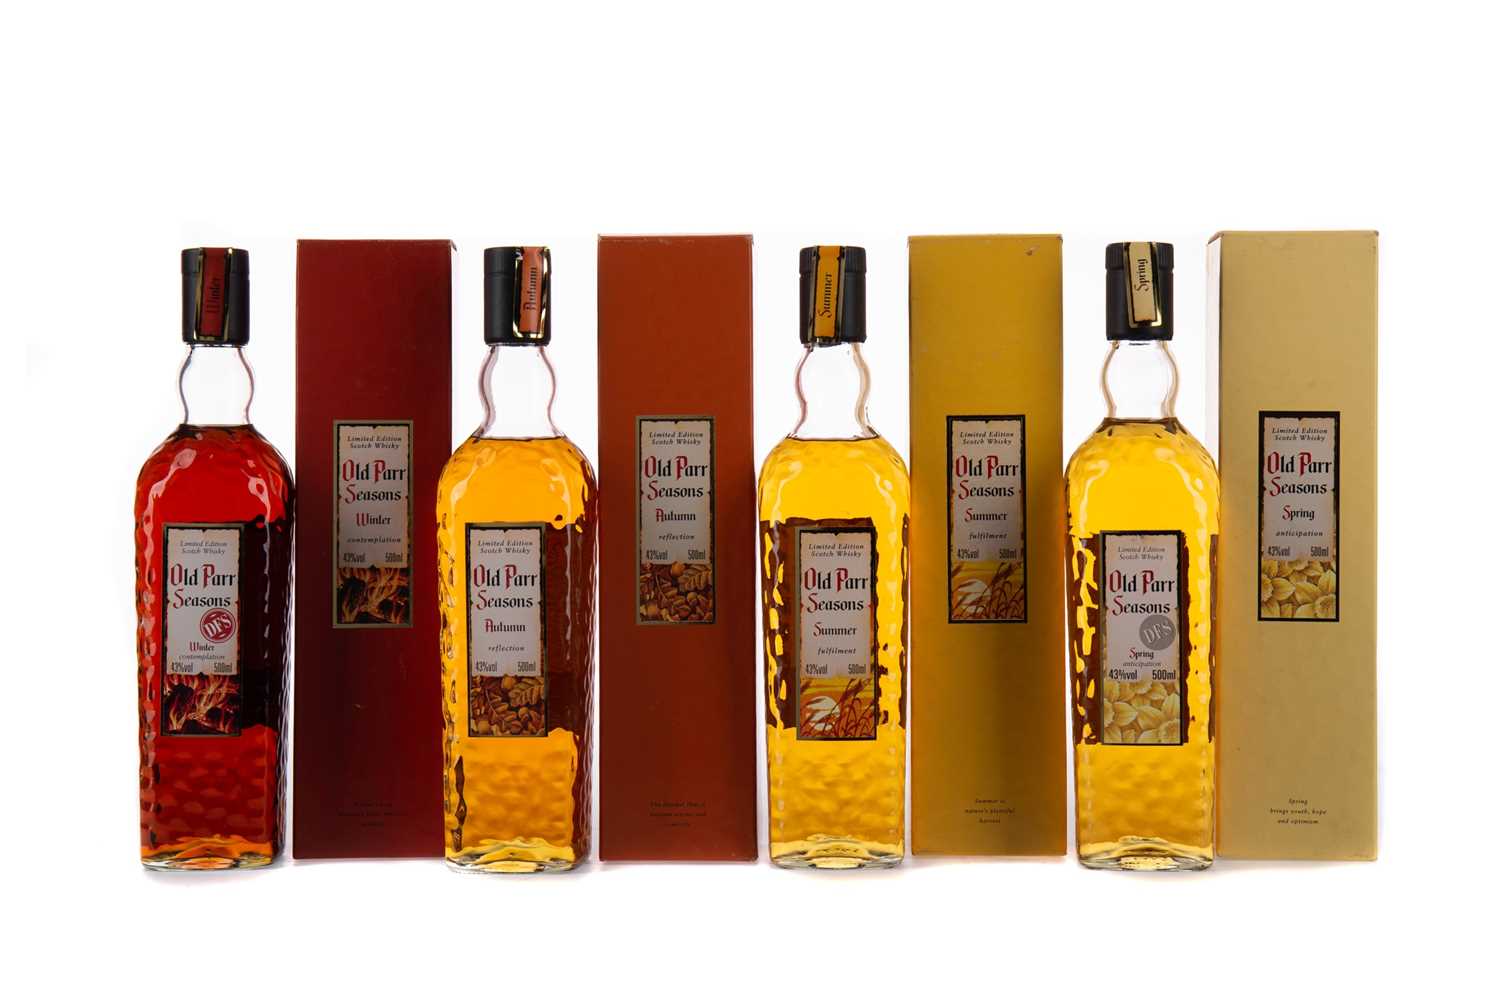 Lot 35 - FOUR SEASONS OF OLD PARR